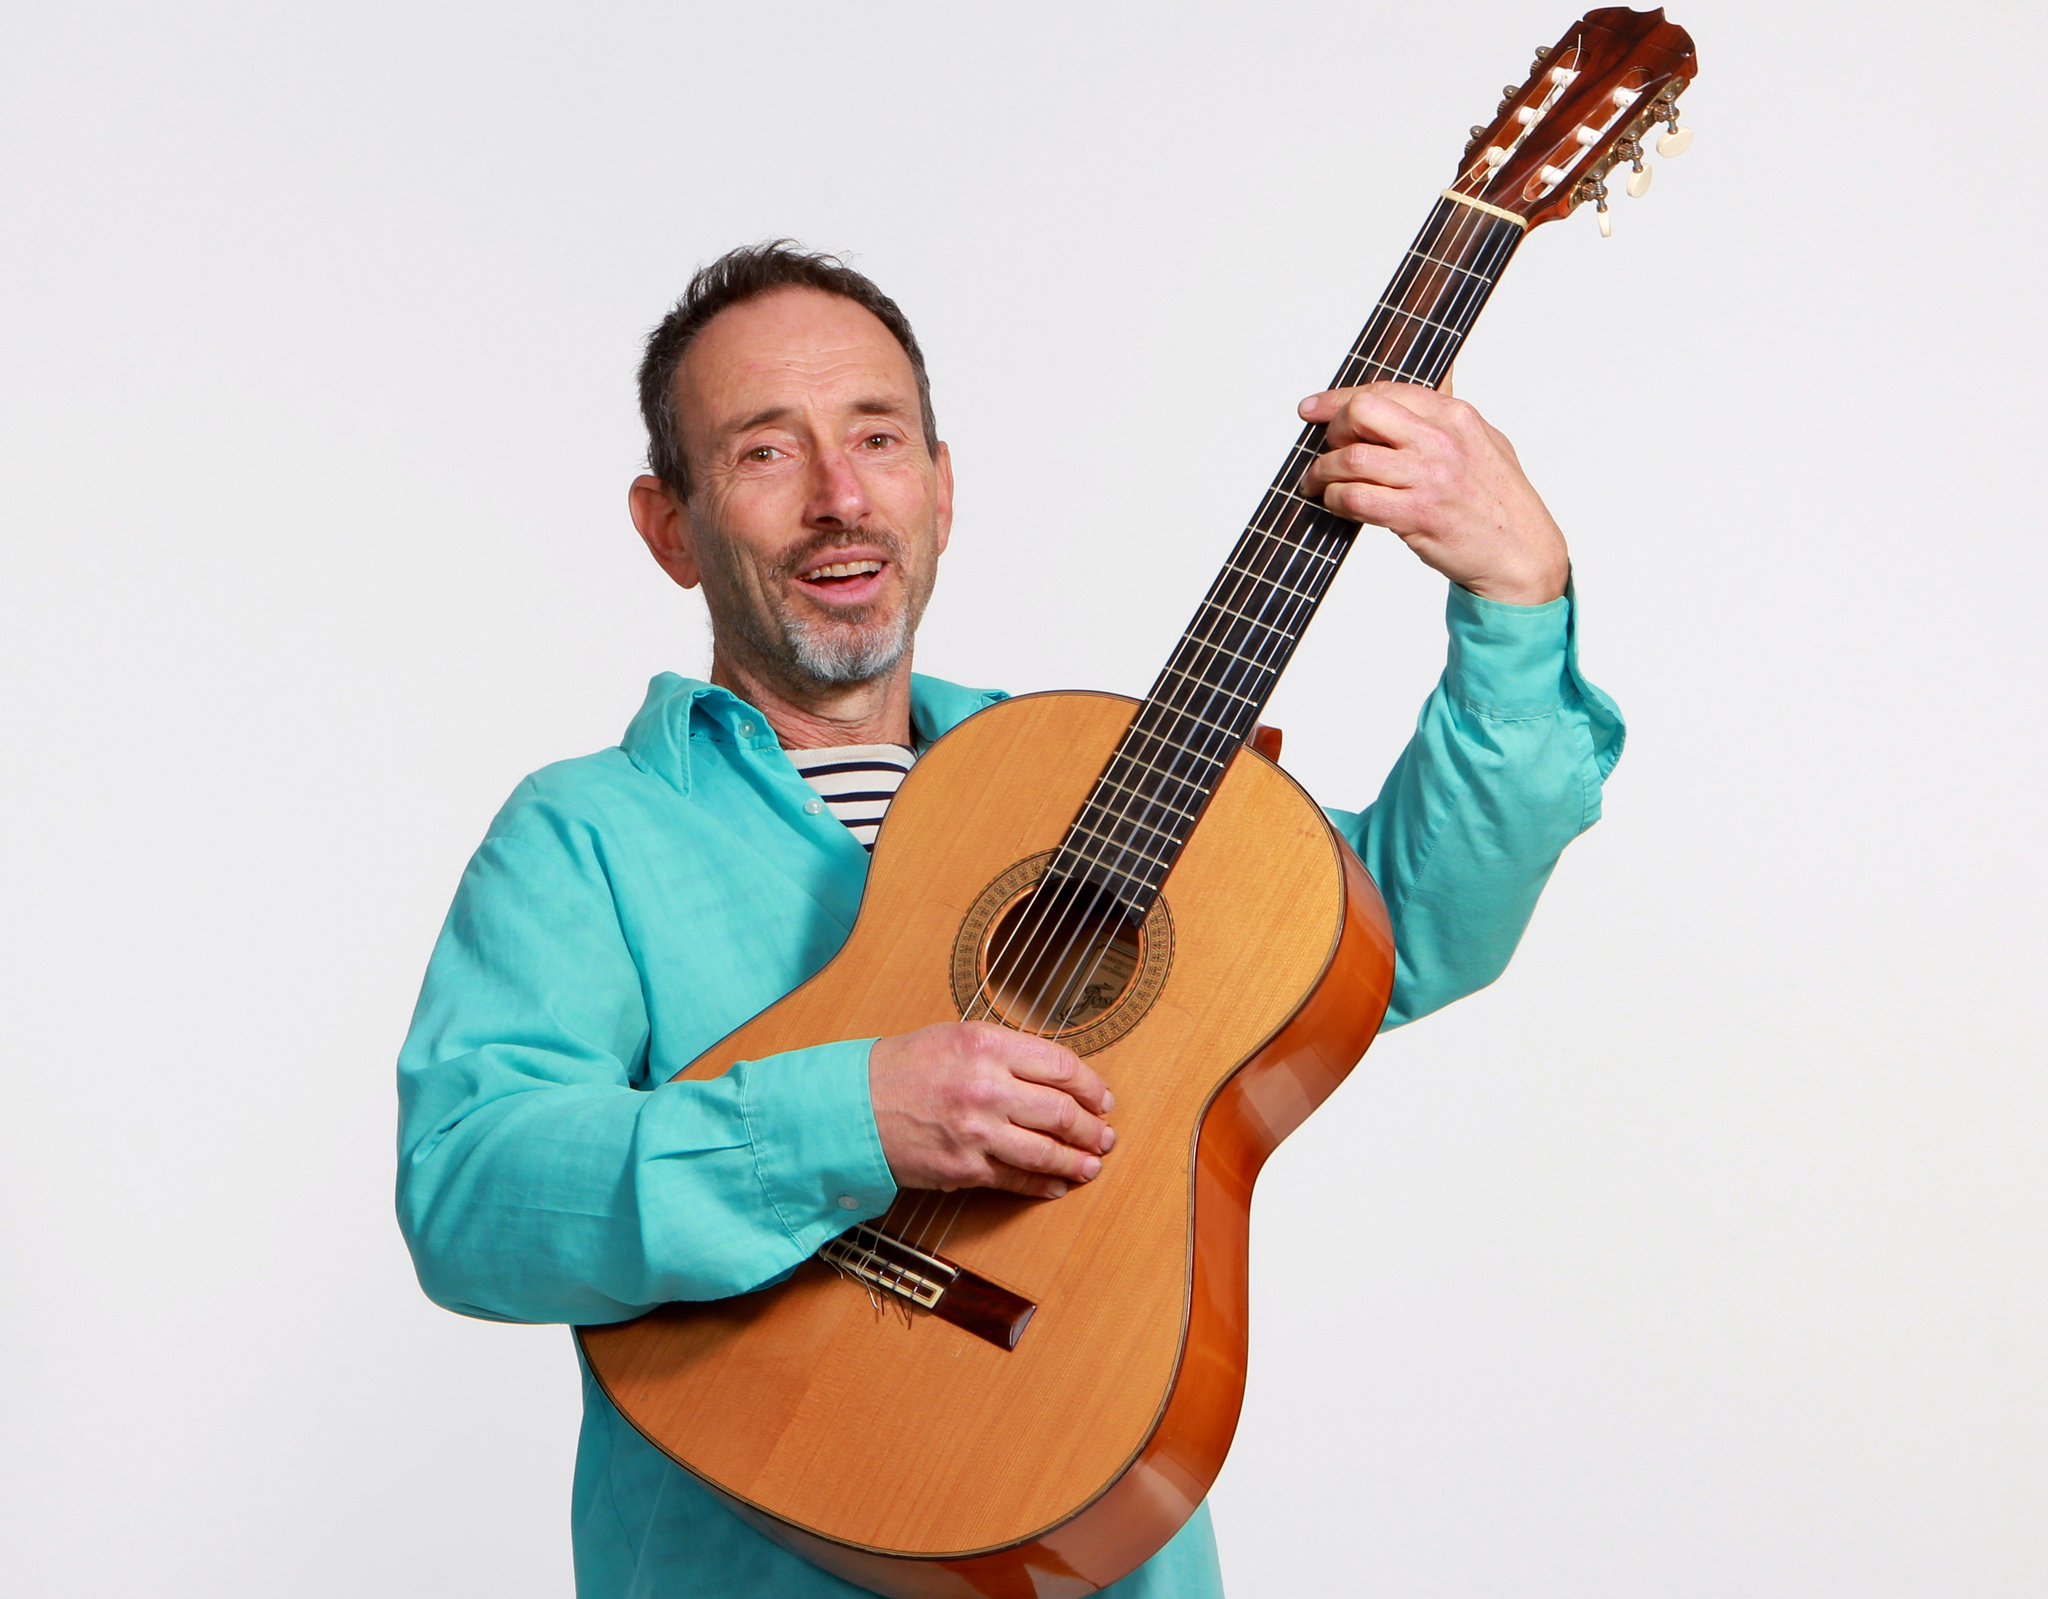 I know he\s not on social media, but happy birthday to one of my all-time faves, Jonathan Richman. 